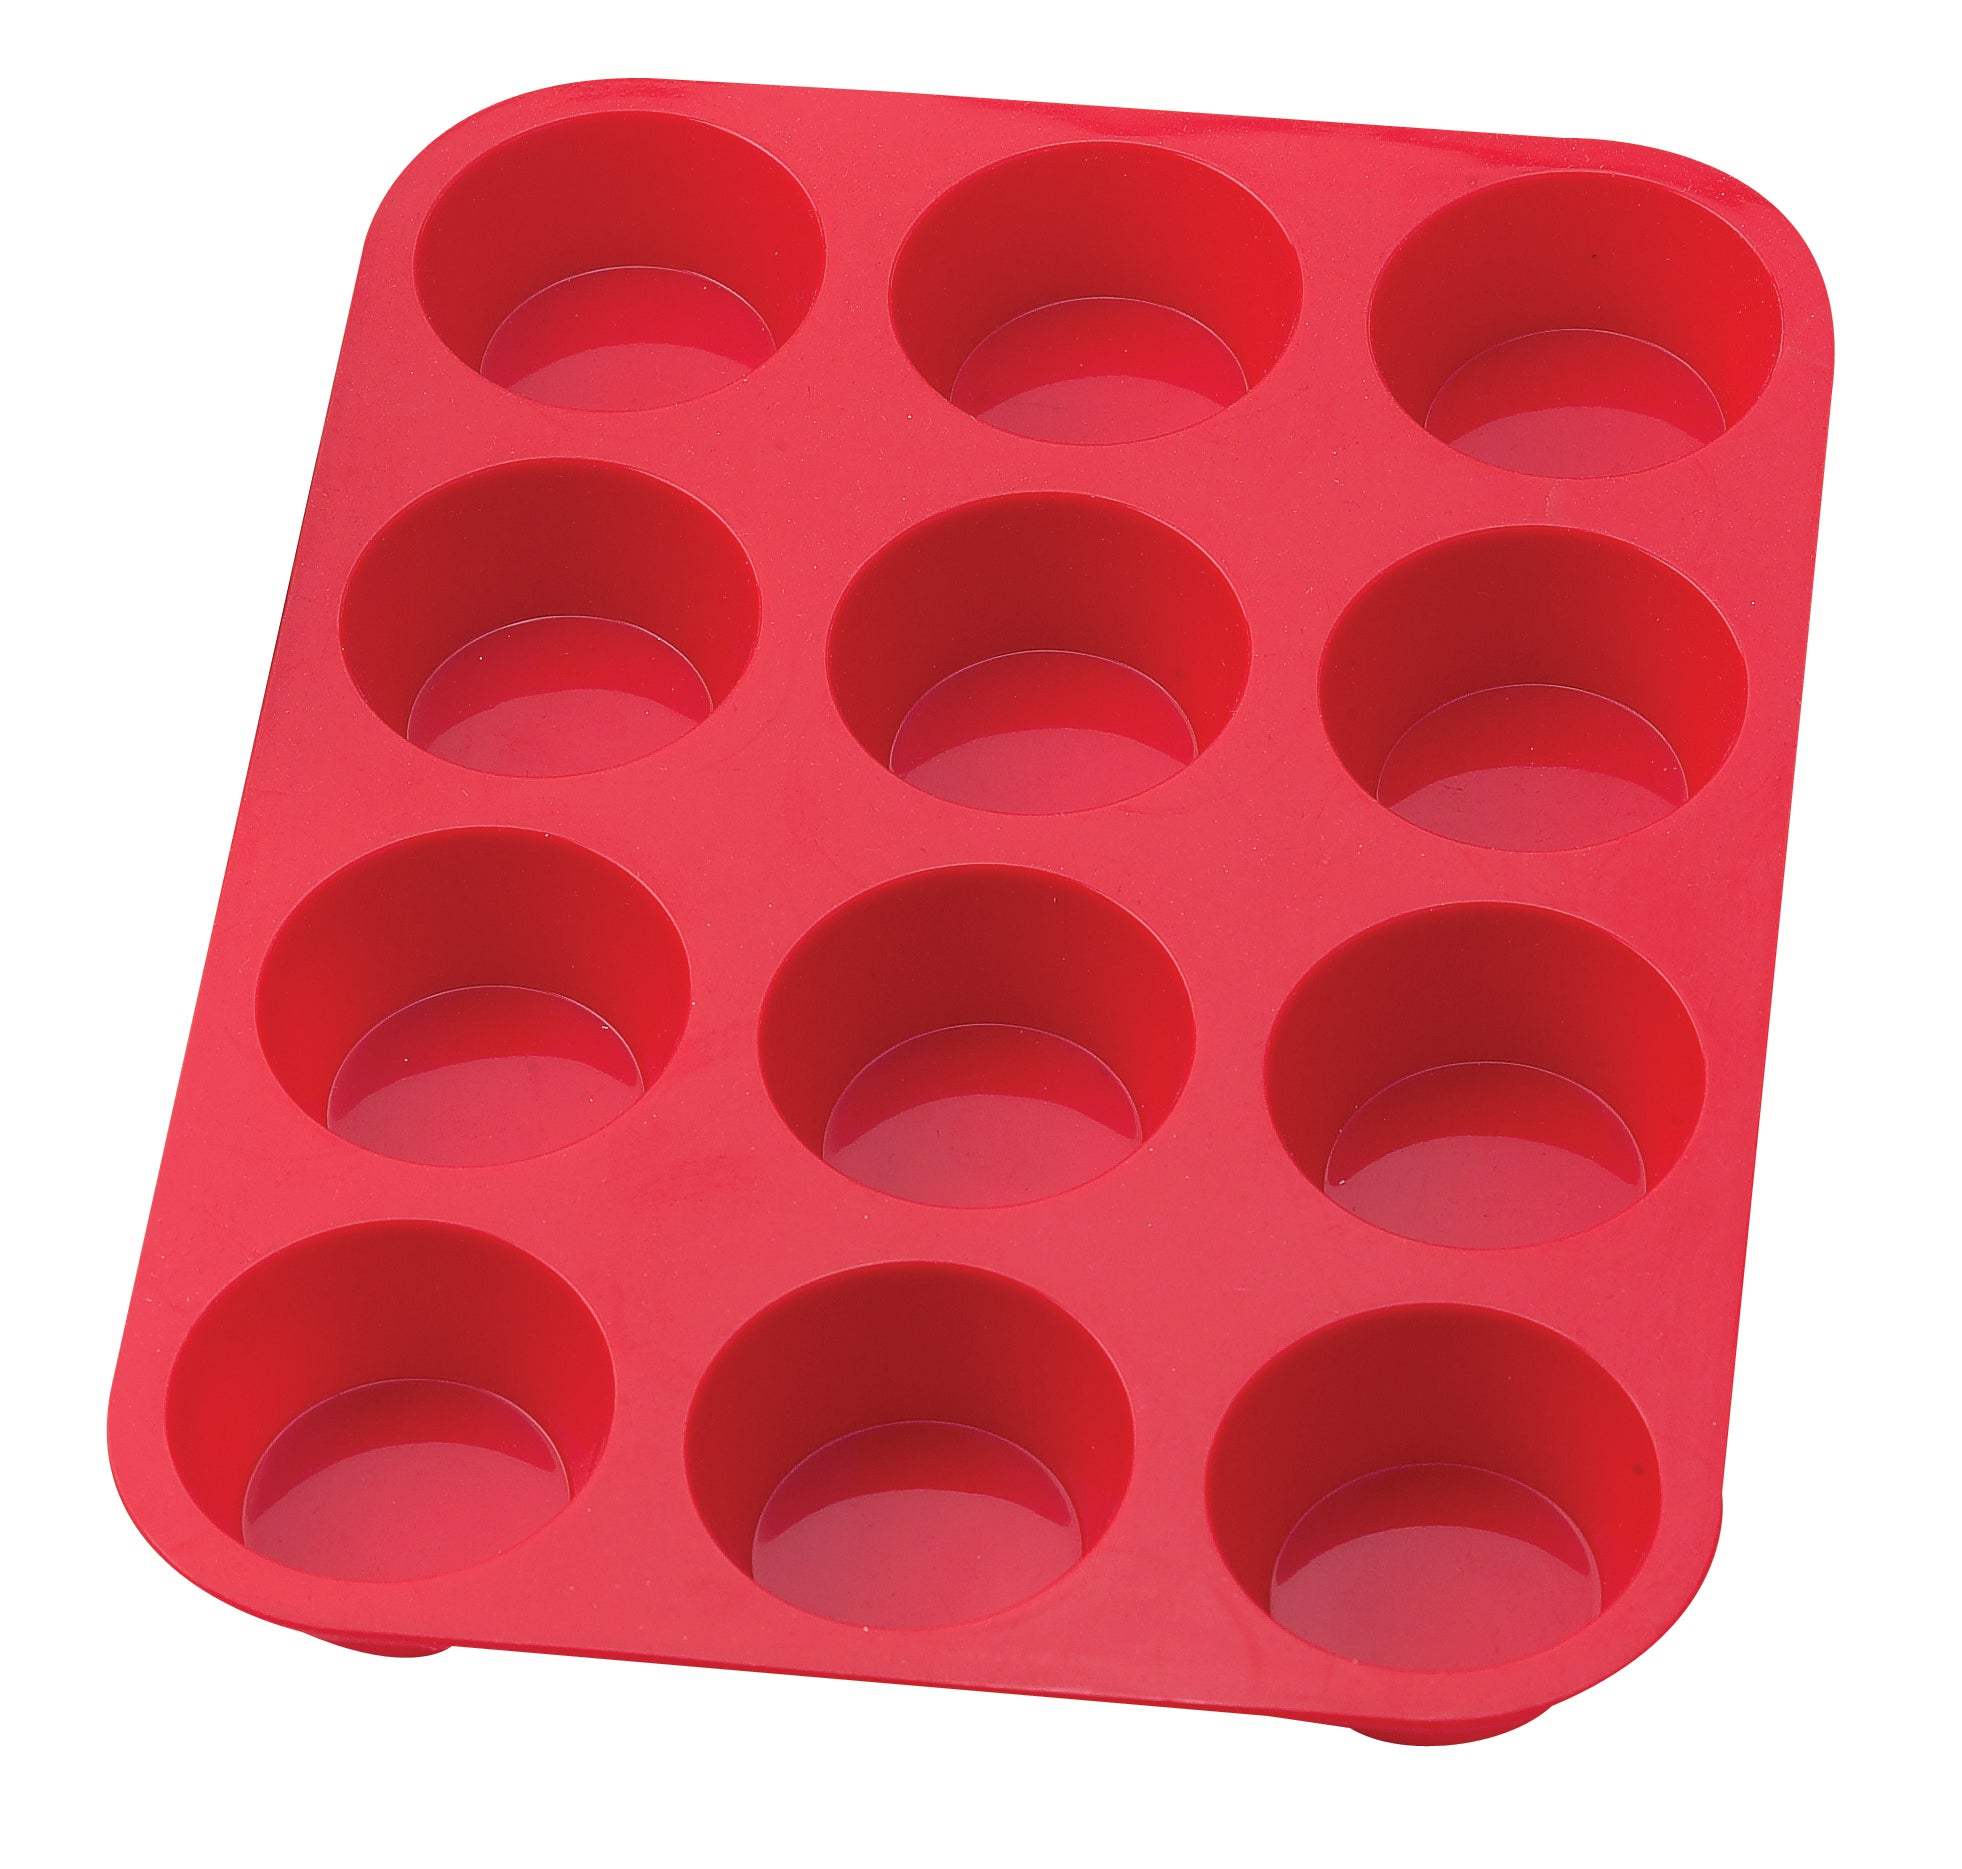 Mrs Anderson's Silicone Muffin Pan – 12 Cup